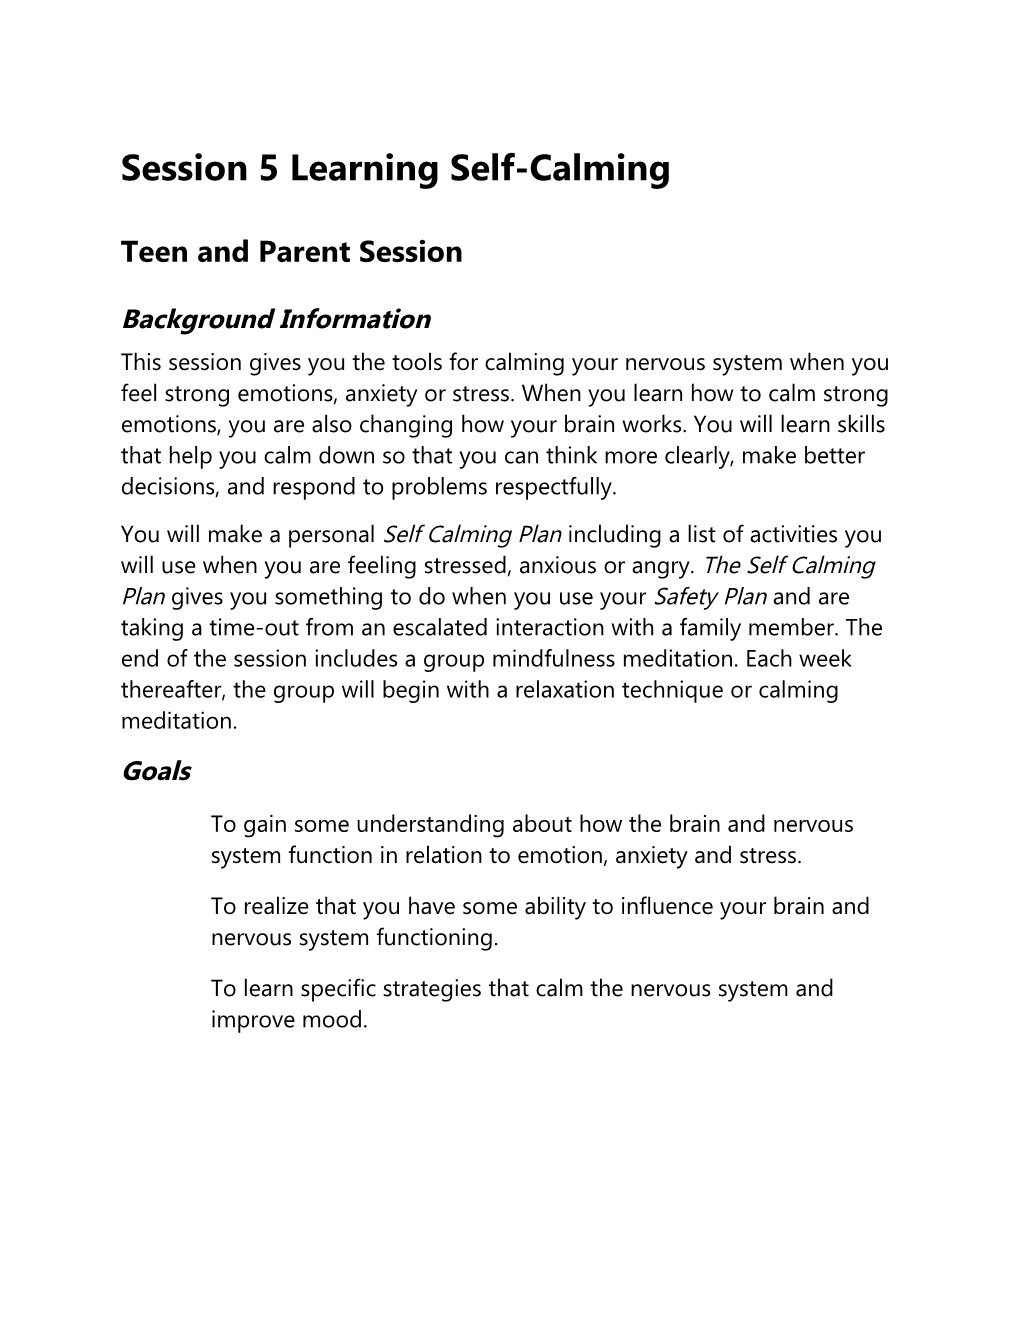 Session 5 Learning Self-Calming